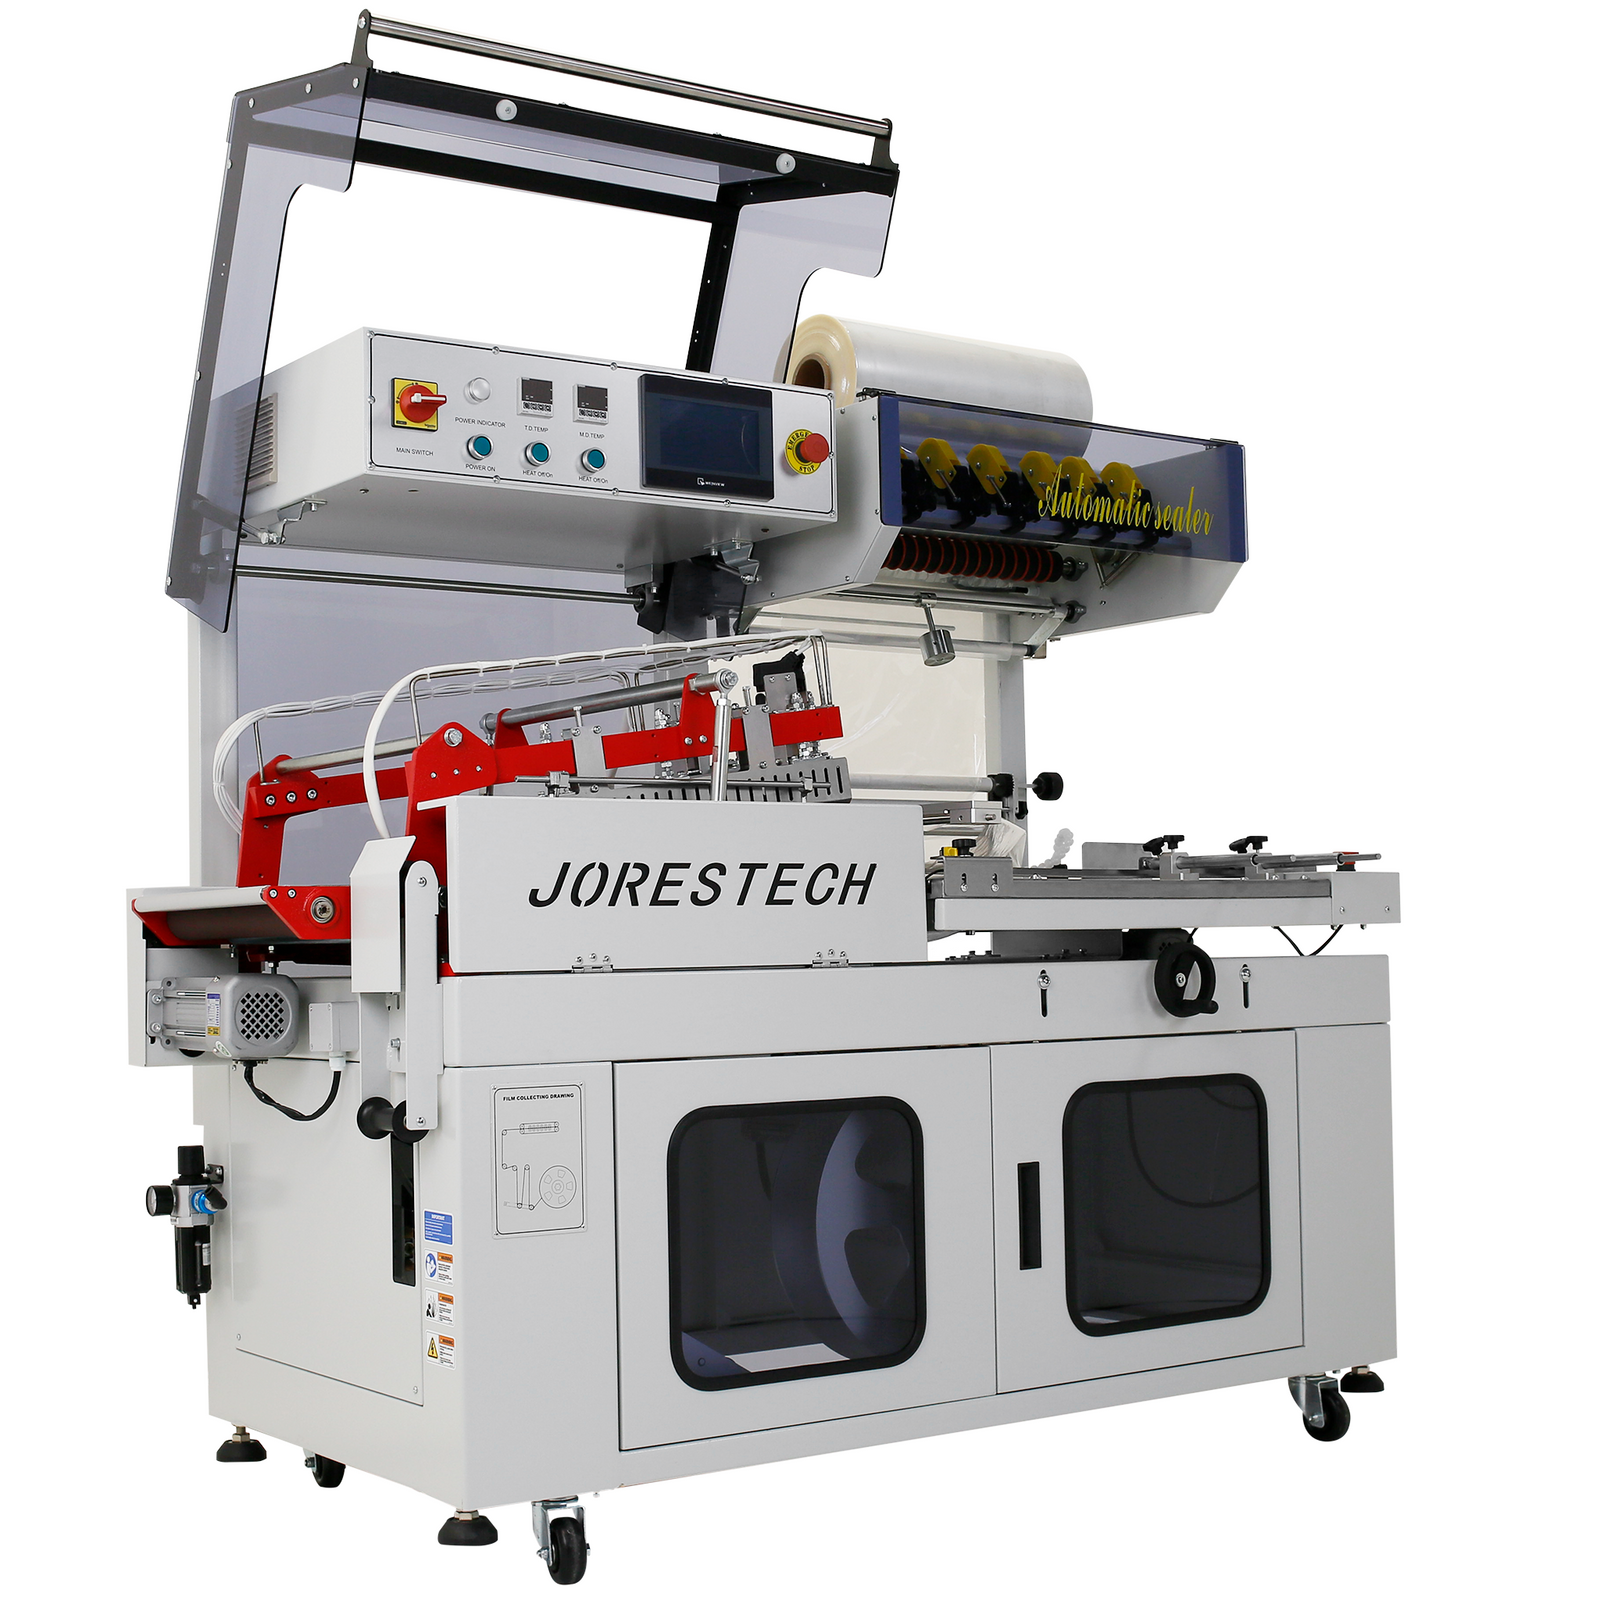 Diagonal view of a light gray JORESTECH automatic L Bar Film Sealer over white background.  Shrink film Sealer had the lid of the sealing chamber open to show the red L bar mechanism. Machine has a roll of clear shrink film positioned on the dispenser.